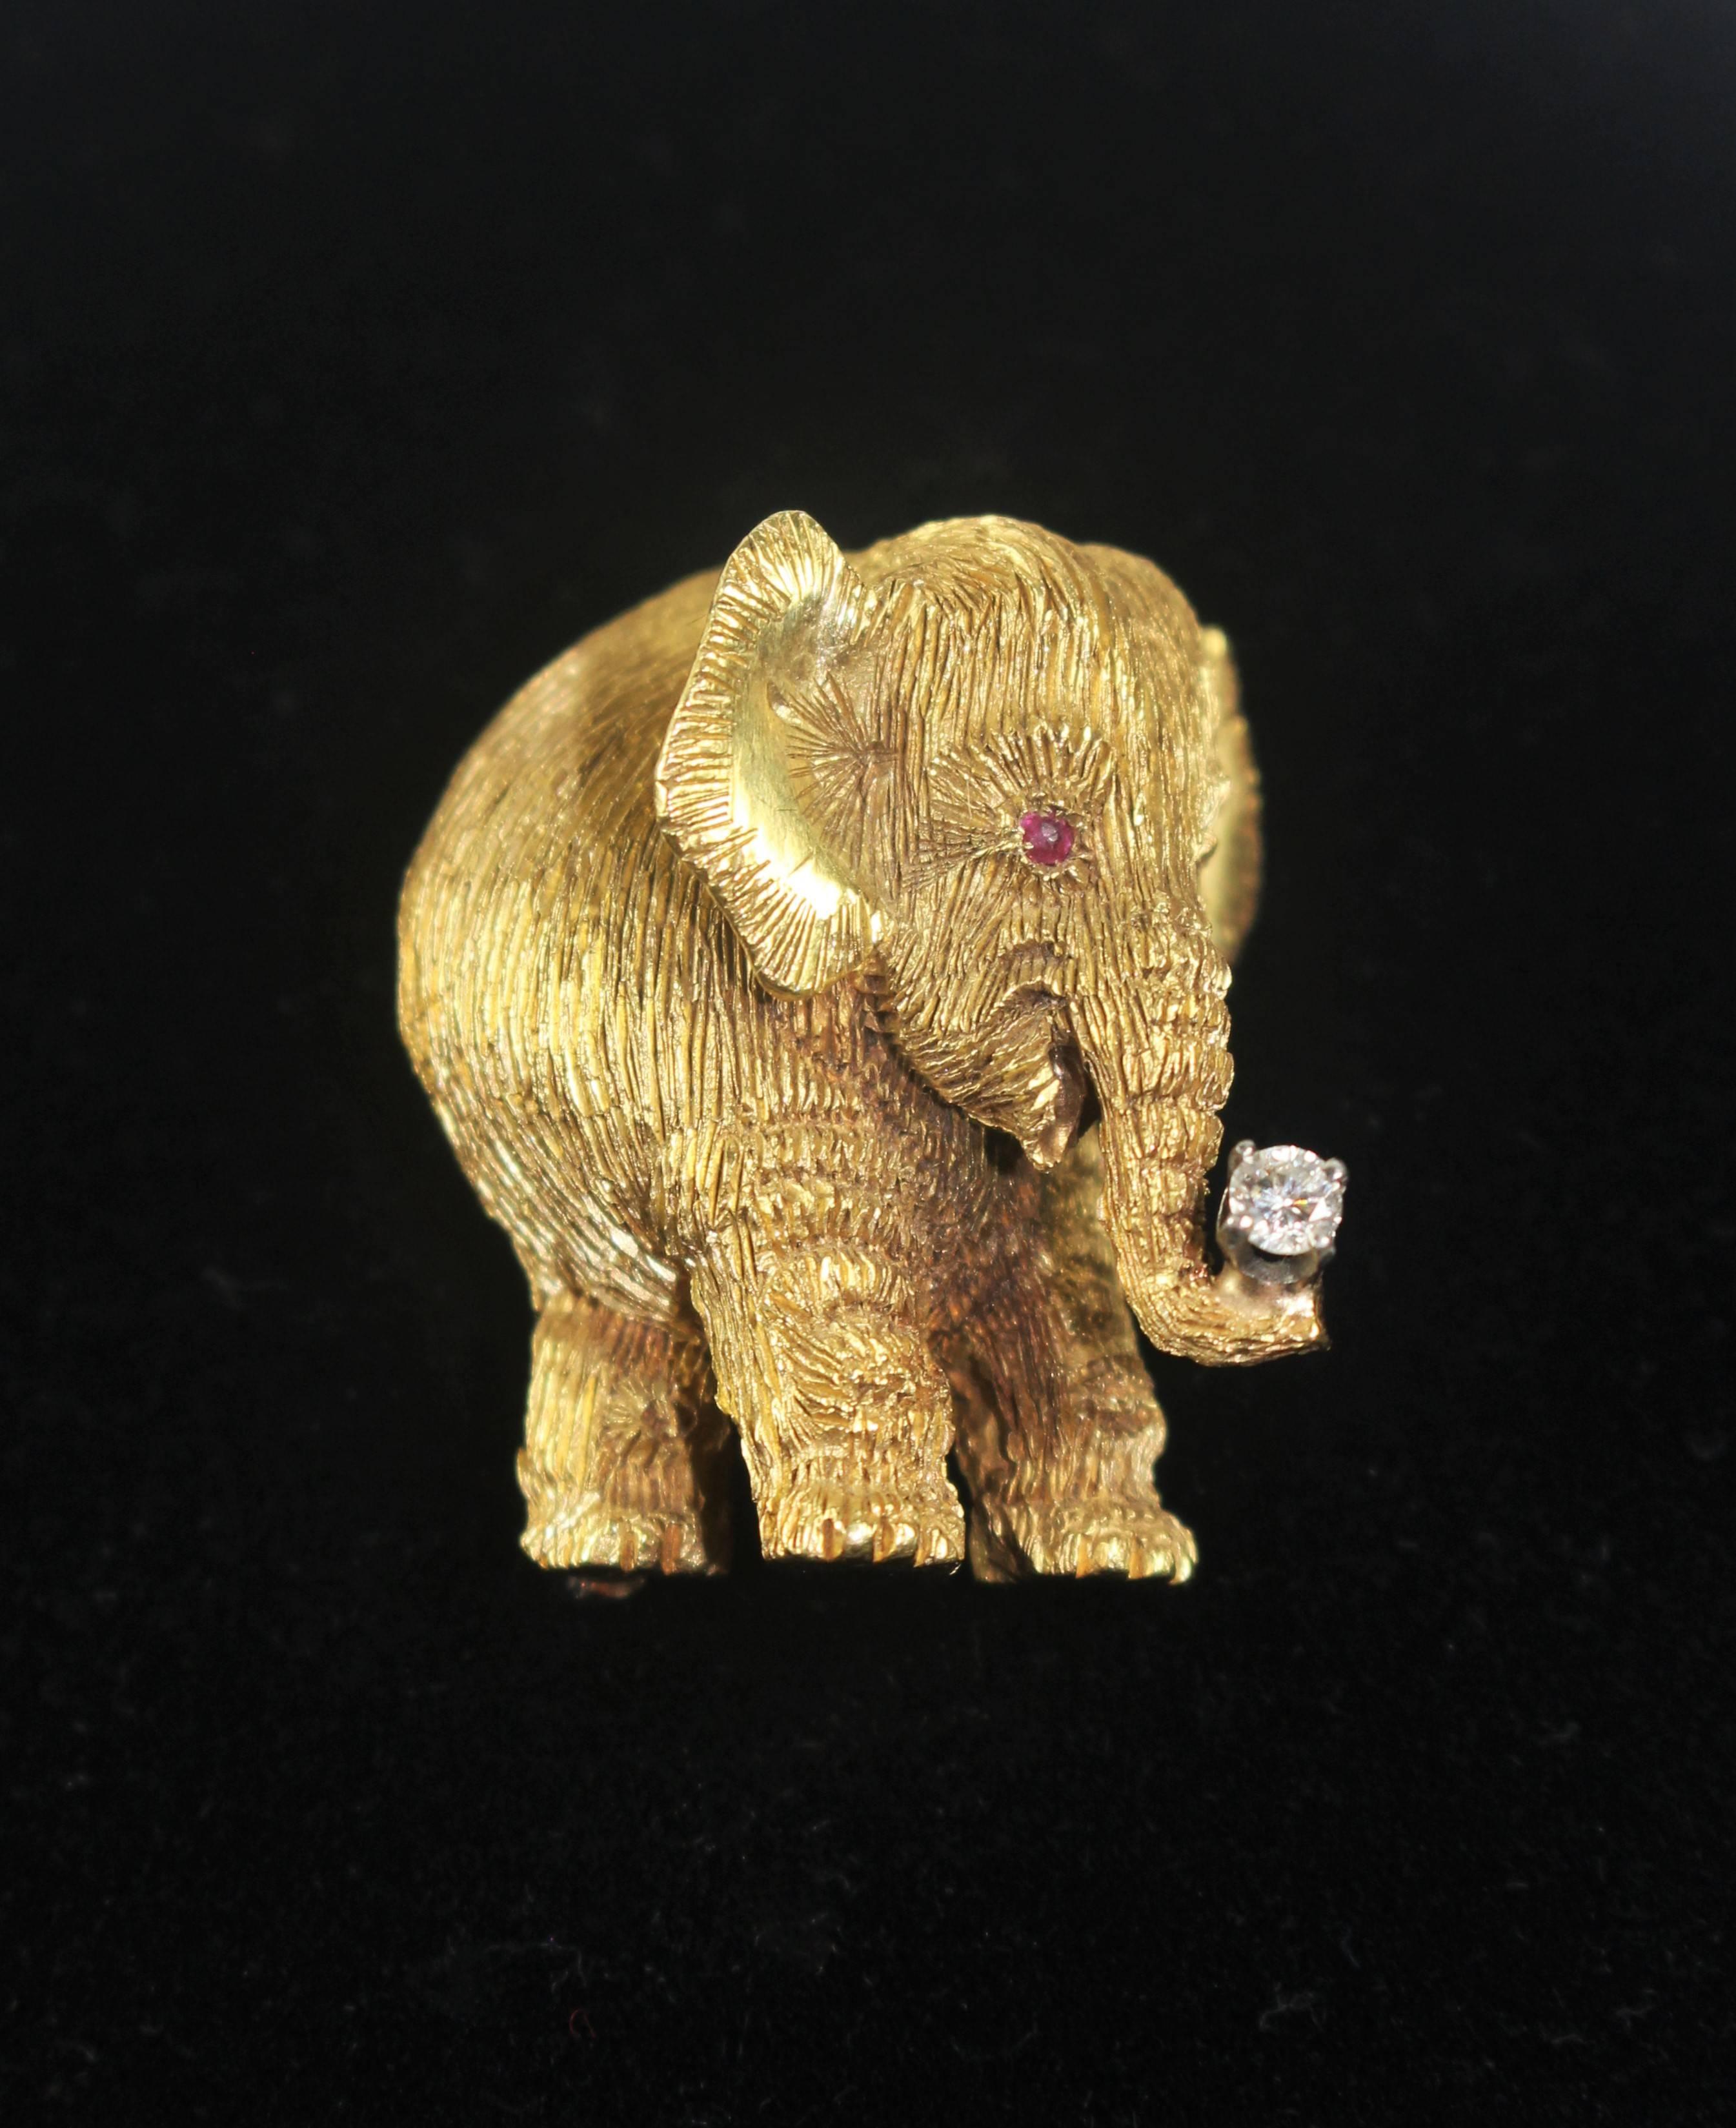 This pendant is composed of 18KT yellow gold. Features a textured design with a diamond held in the trunk and ruby eyes. Has an optional pin closure. In excellent vintage condition.

Listing is for Elephant only. 

Specs: 
18KT Yellow